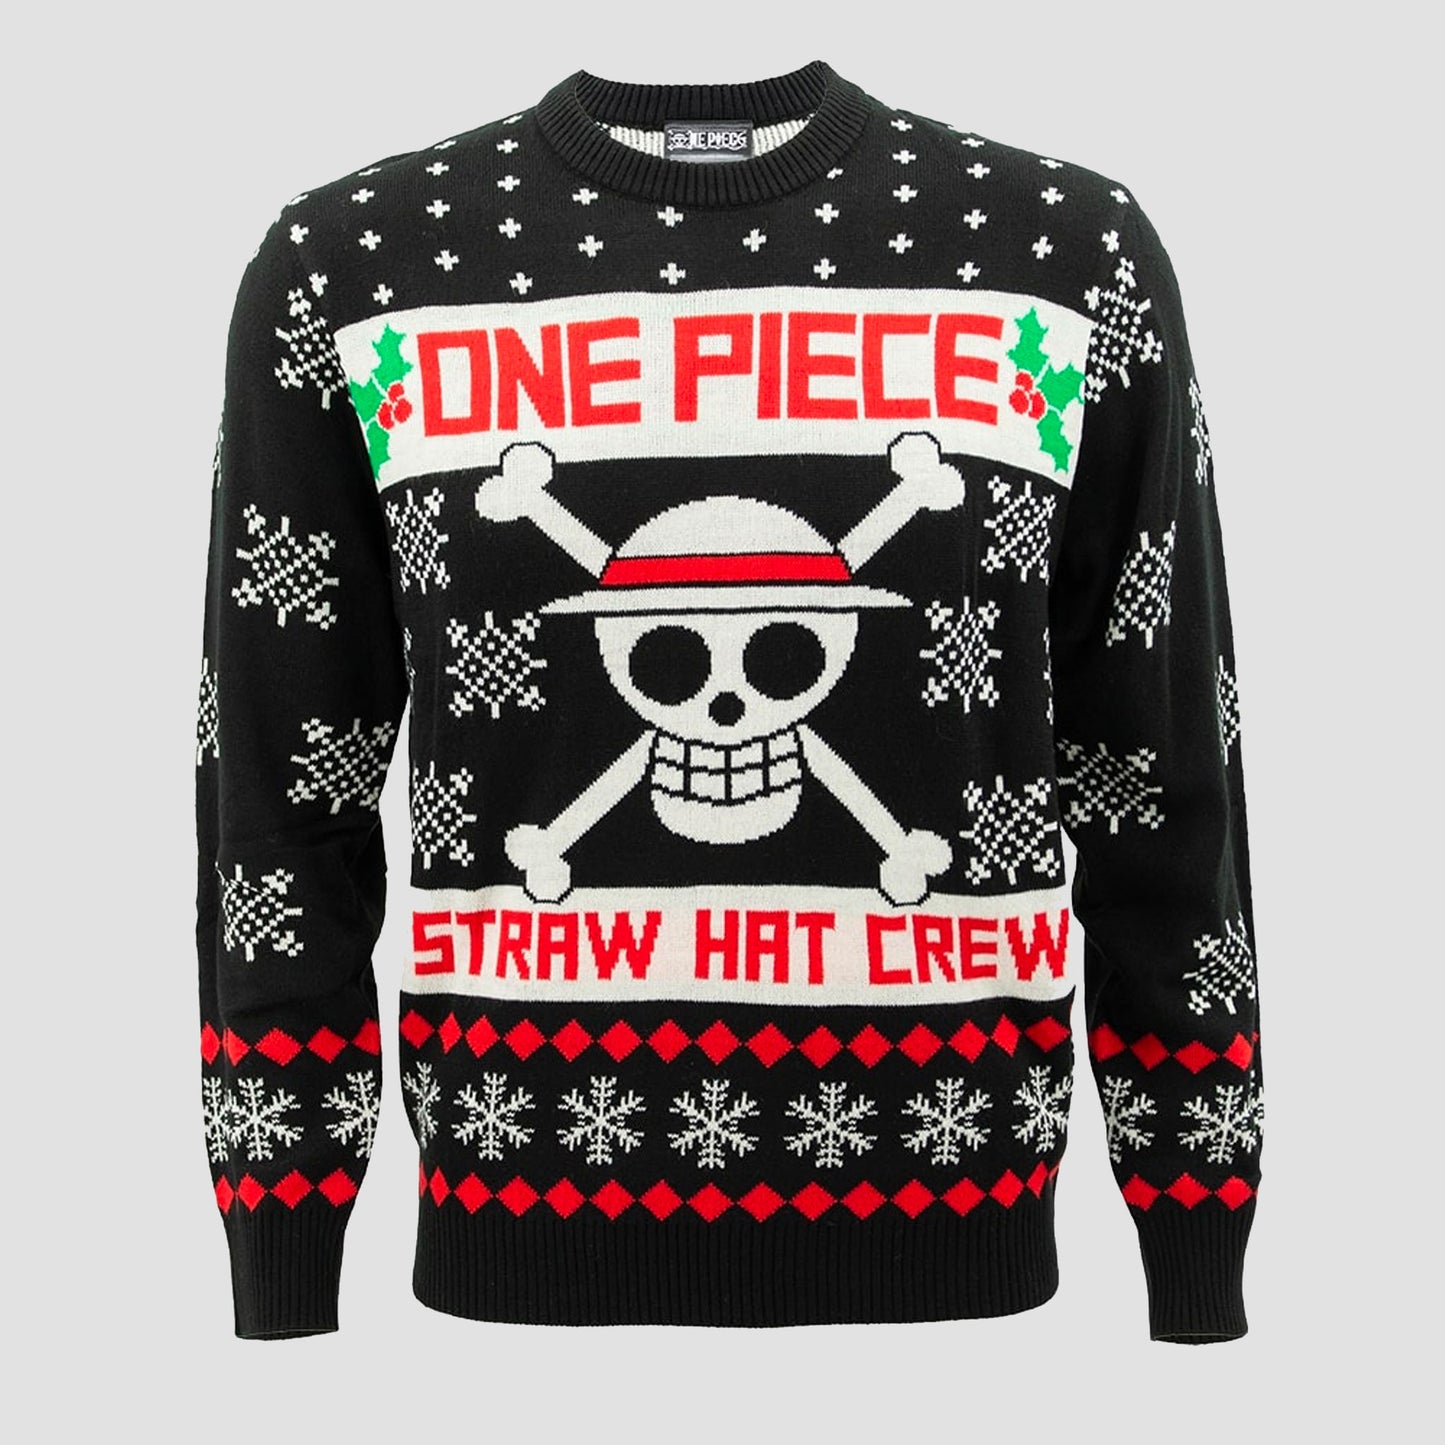 Straw Hat Crew With Jolly Roger (One Piece) Holiday Fleece Sweater